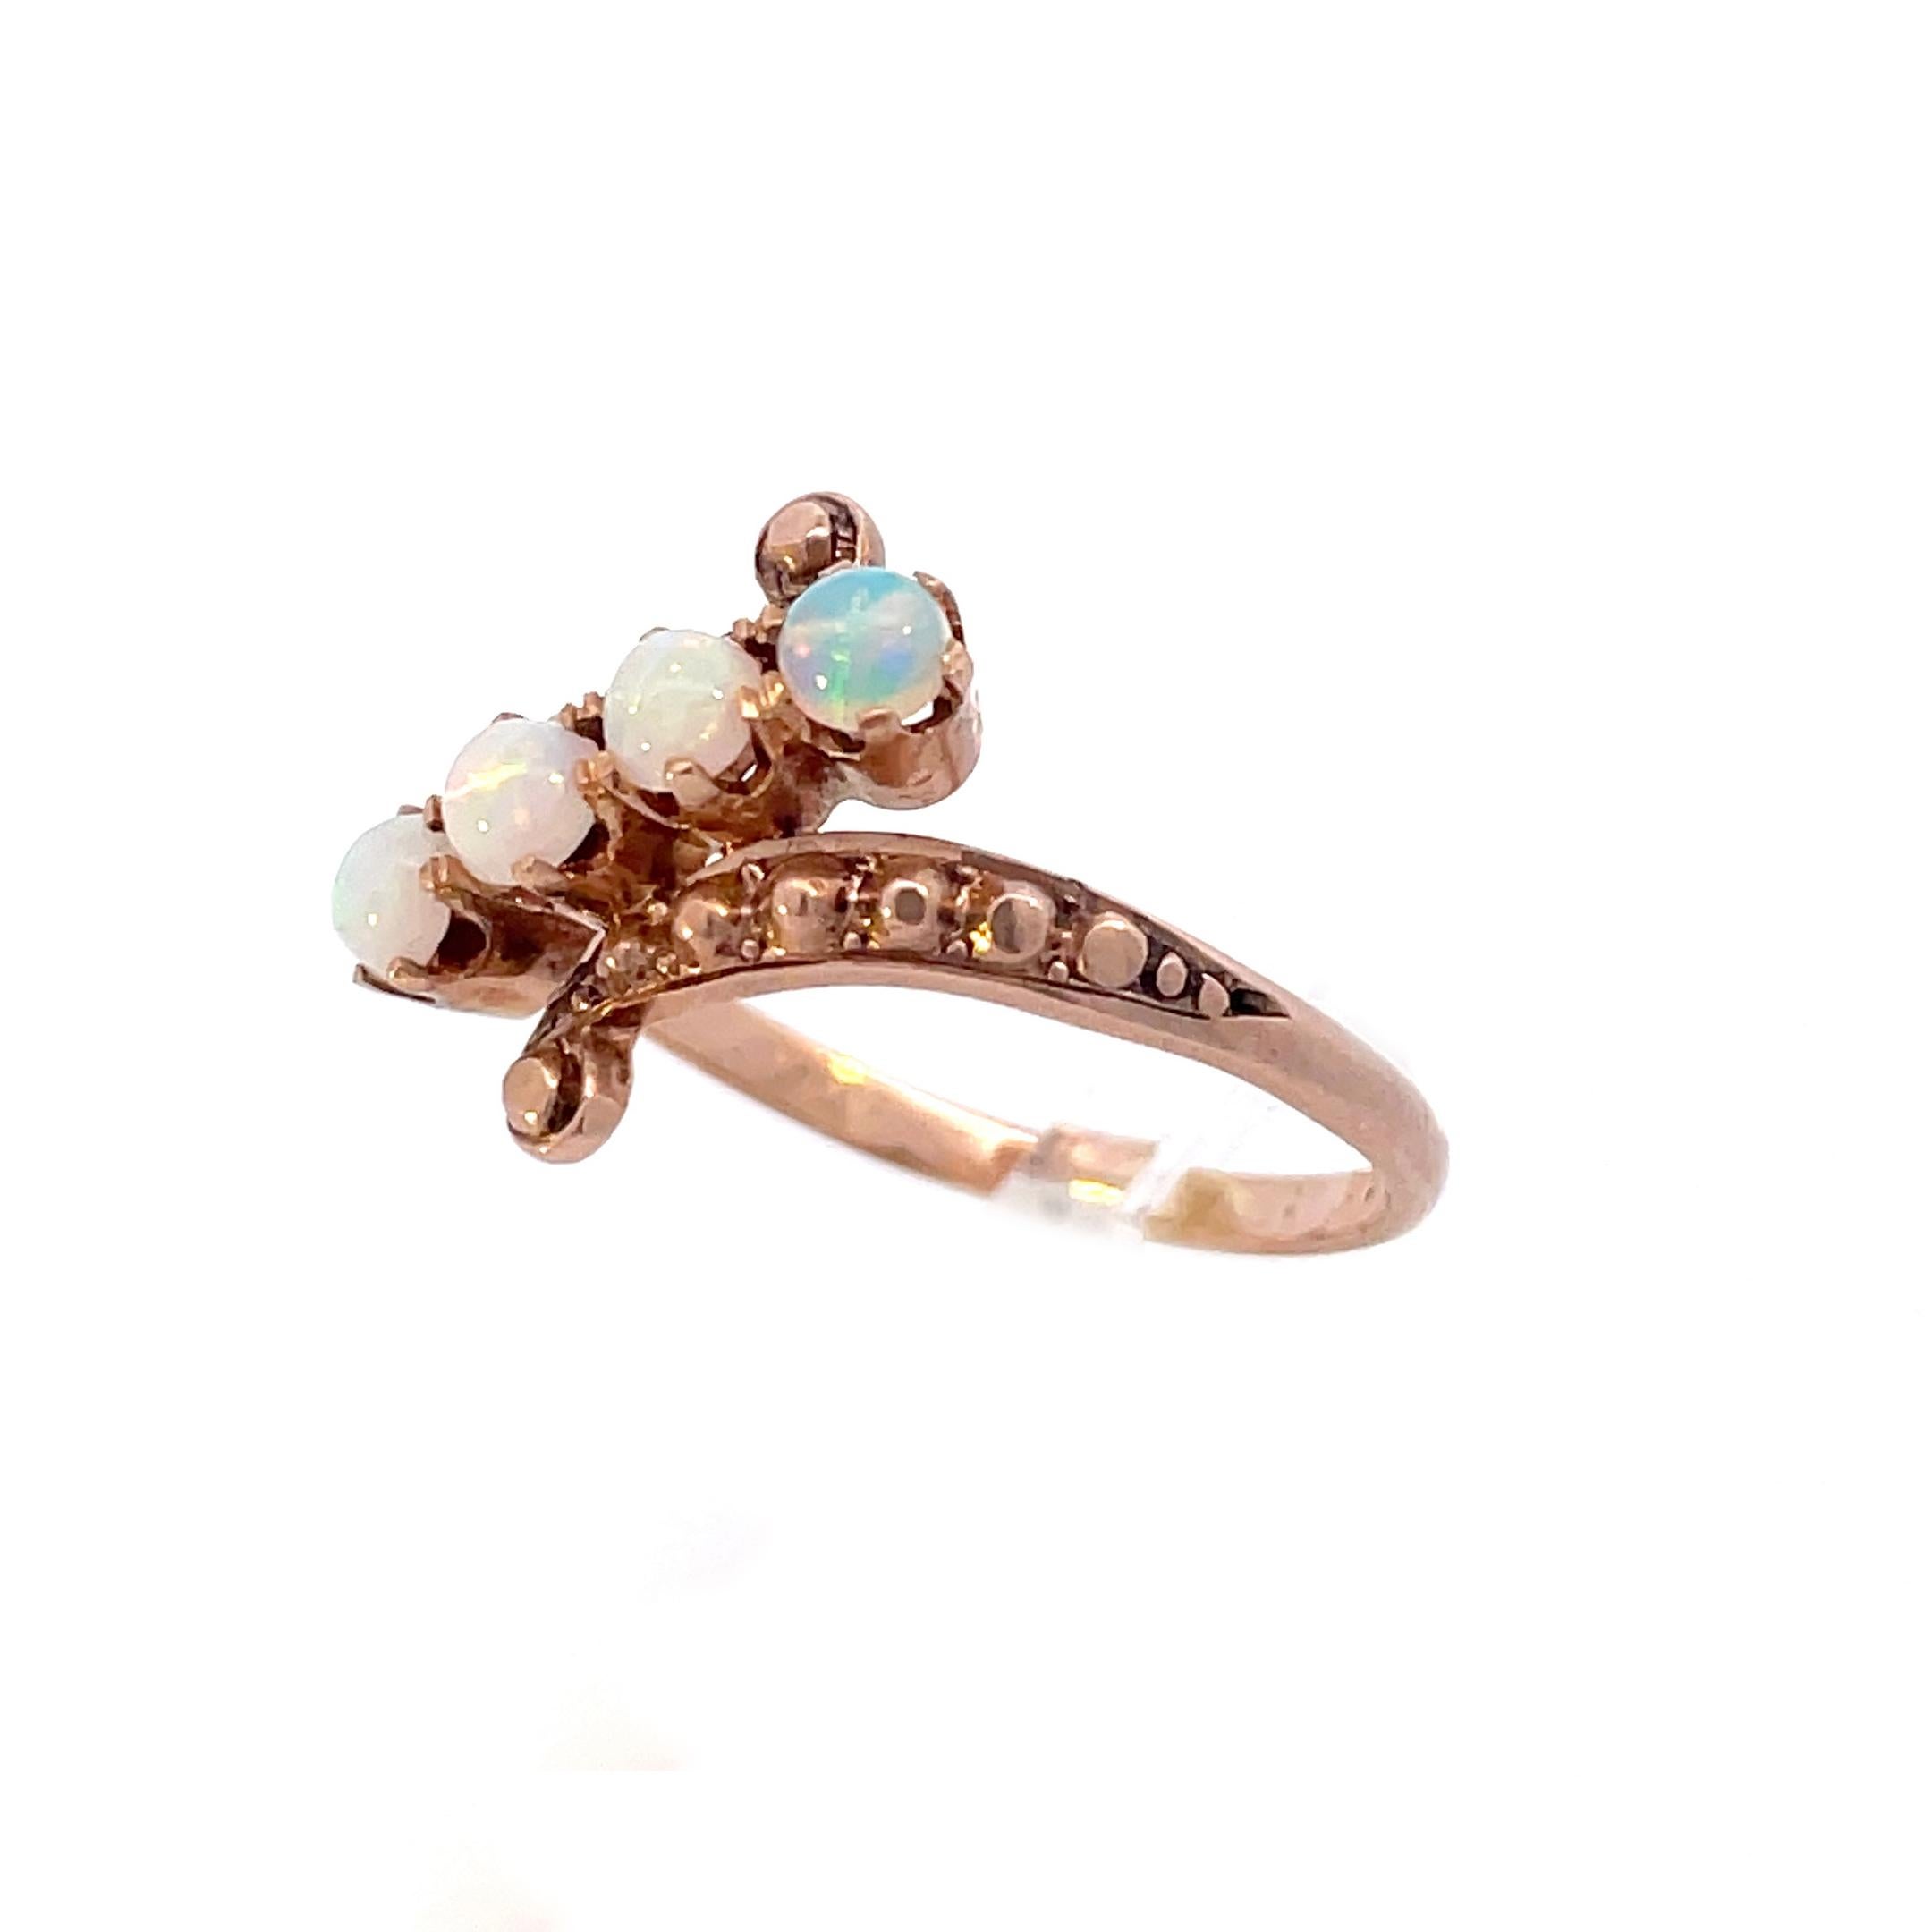 1890 Victorian 14K Yellow Gold White Opal Ring 2